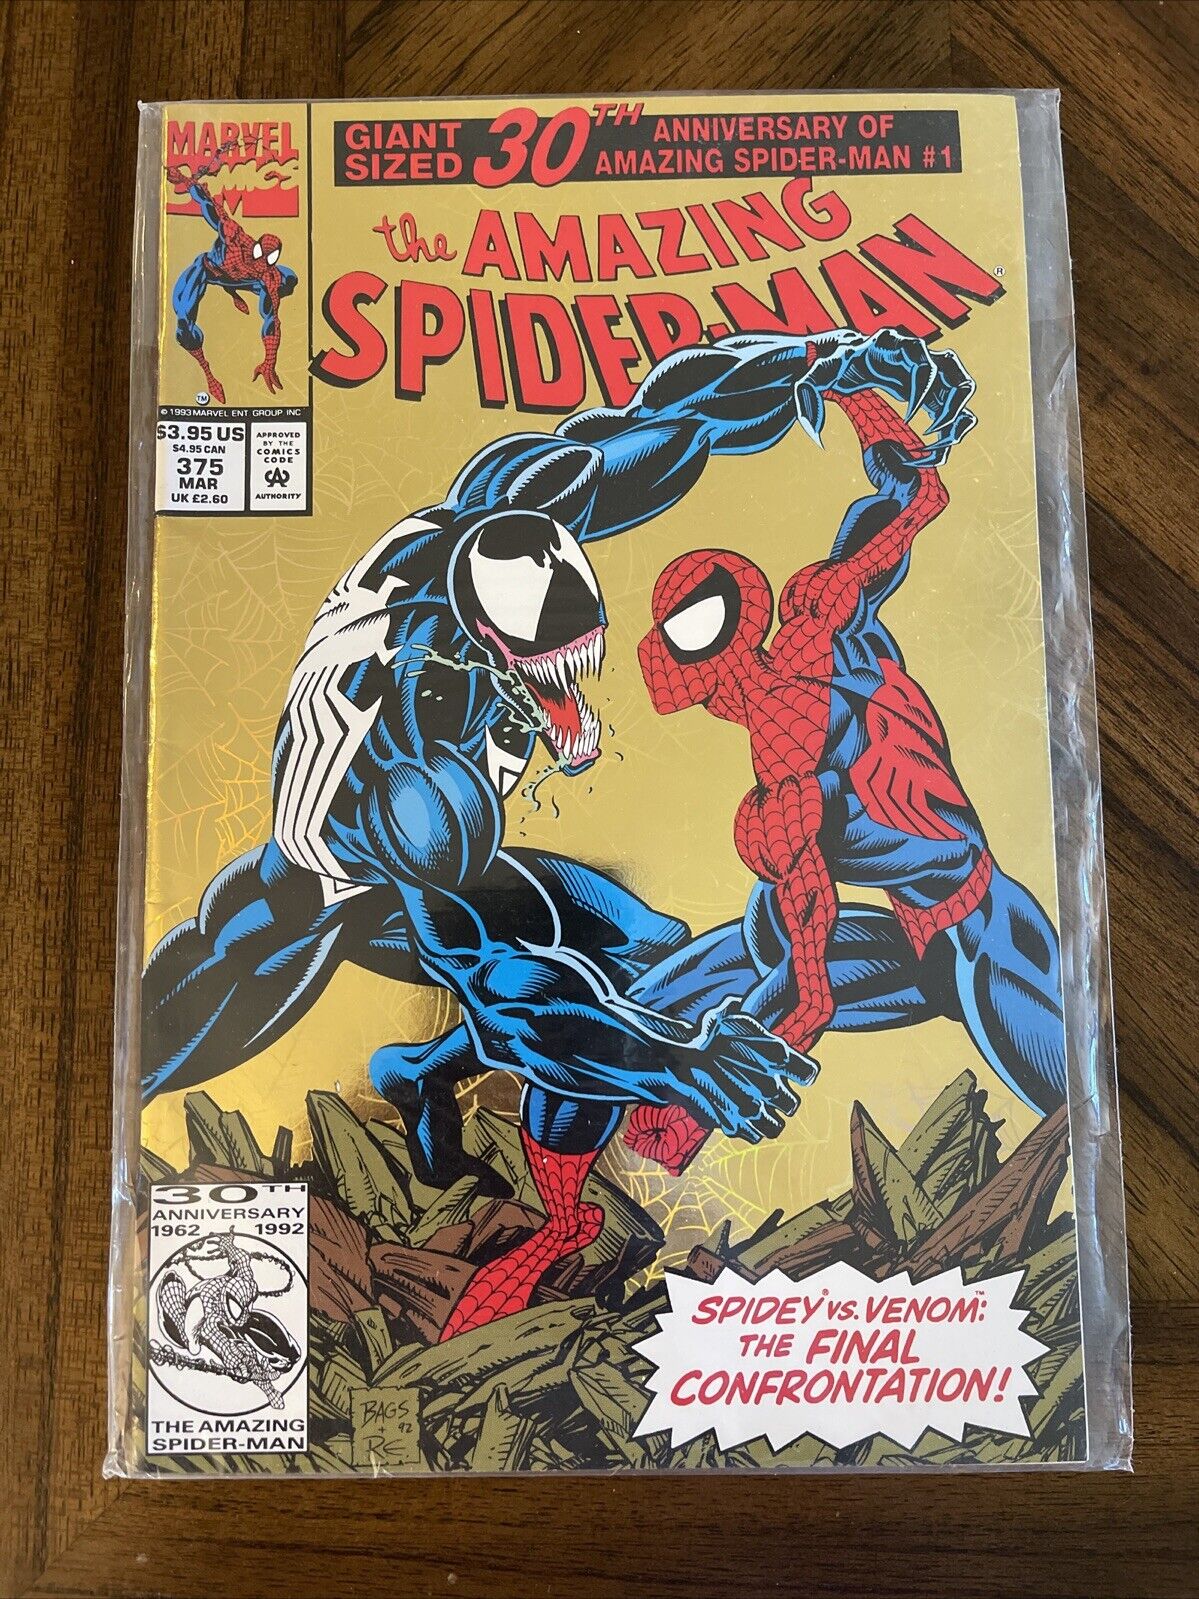 NM Sealed The Amazing Spider-Man  #375 Giant Sized Gold 30th Anniversary